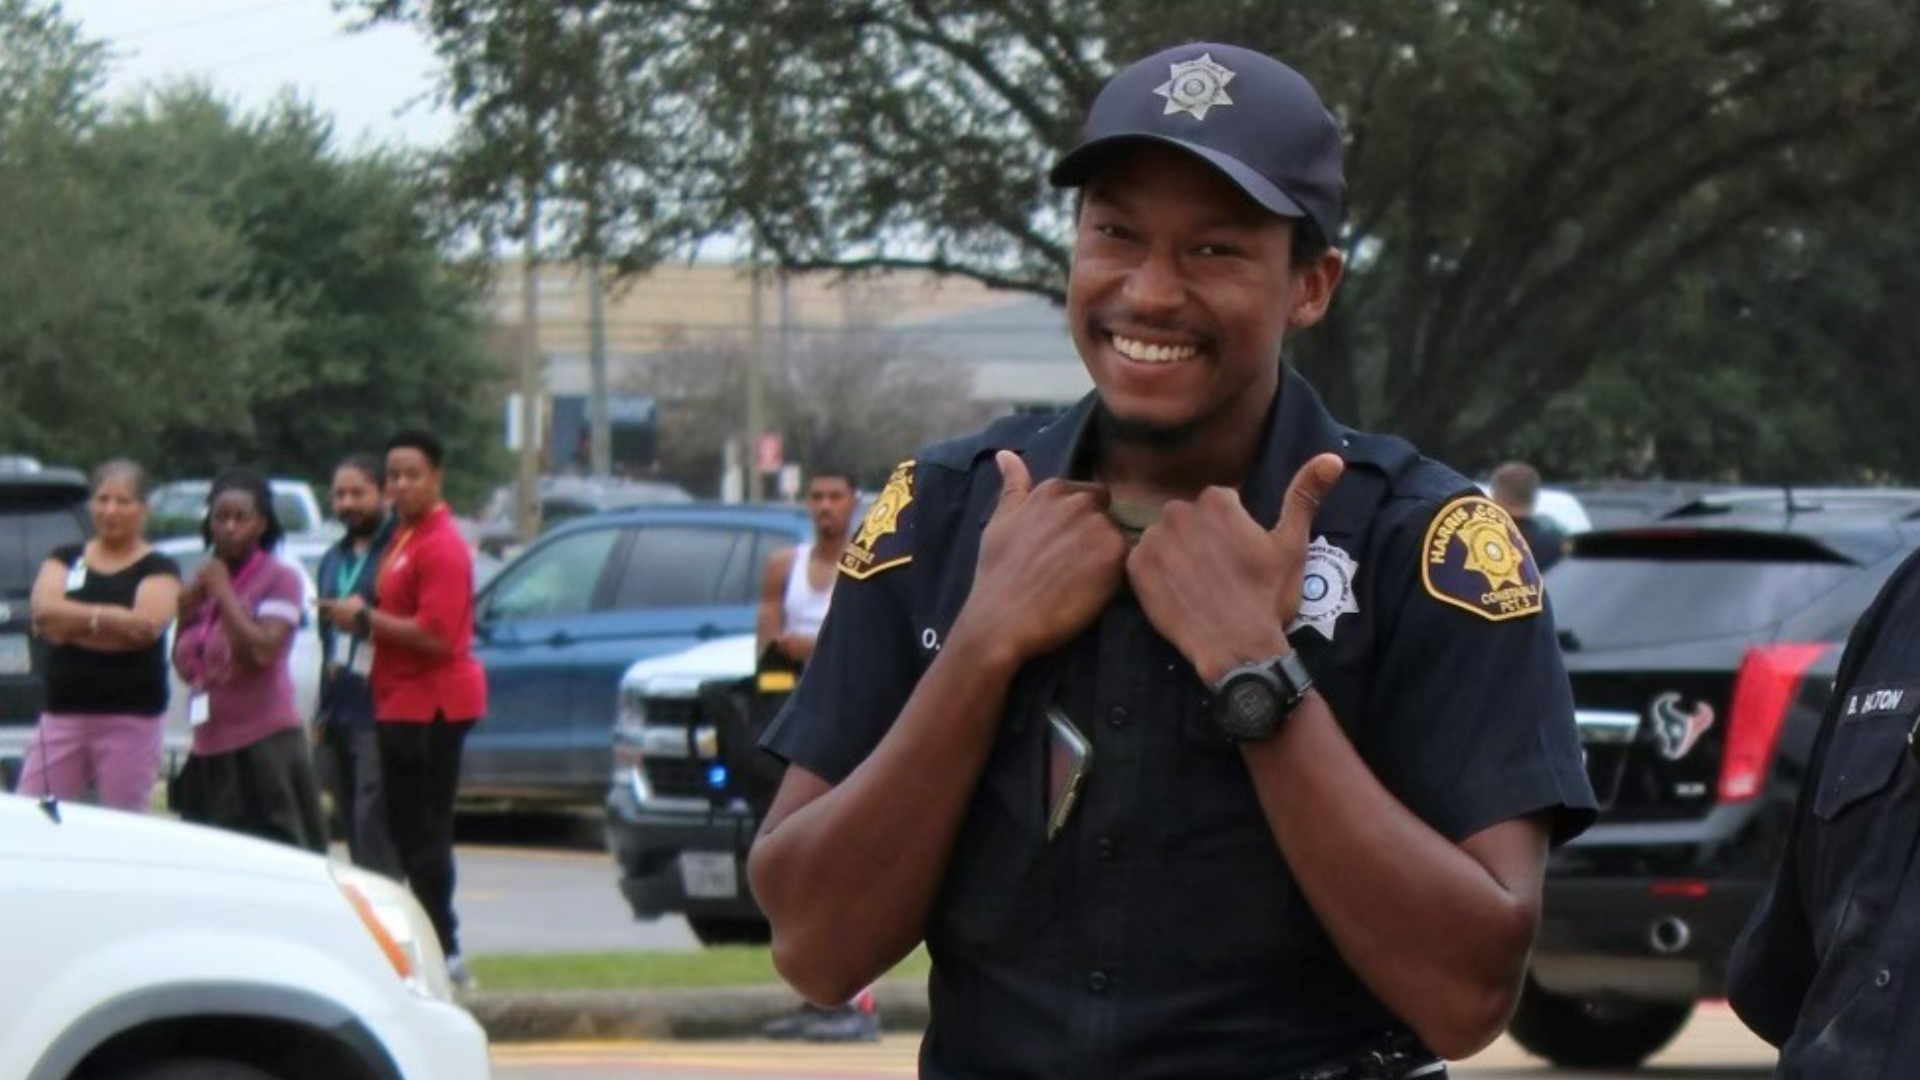 Authorities said Harris County Precinct 3 Deputy Constable Omar Ursin had just left his favorite restaurant with dinner for his family when he was shot and killed.